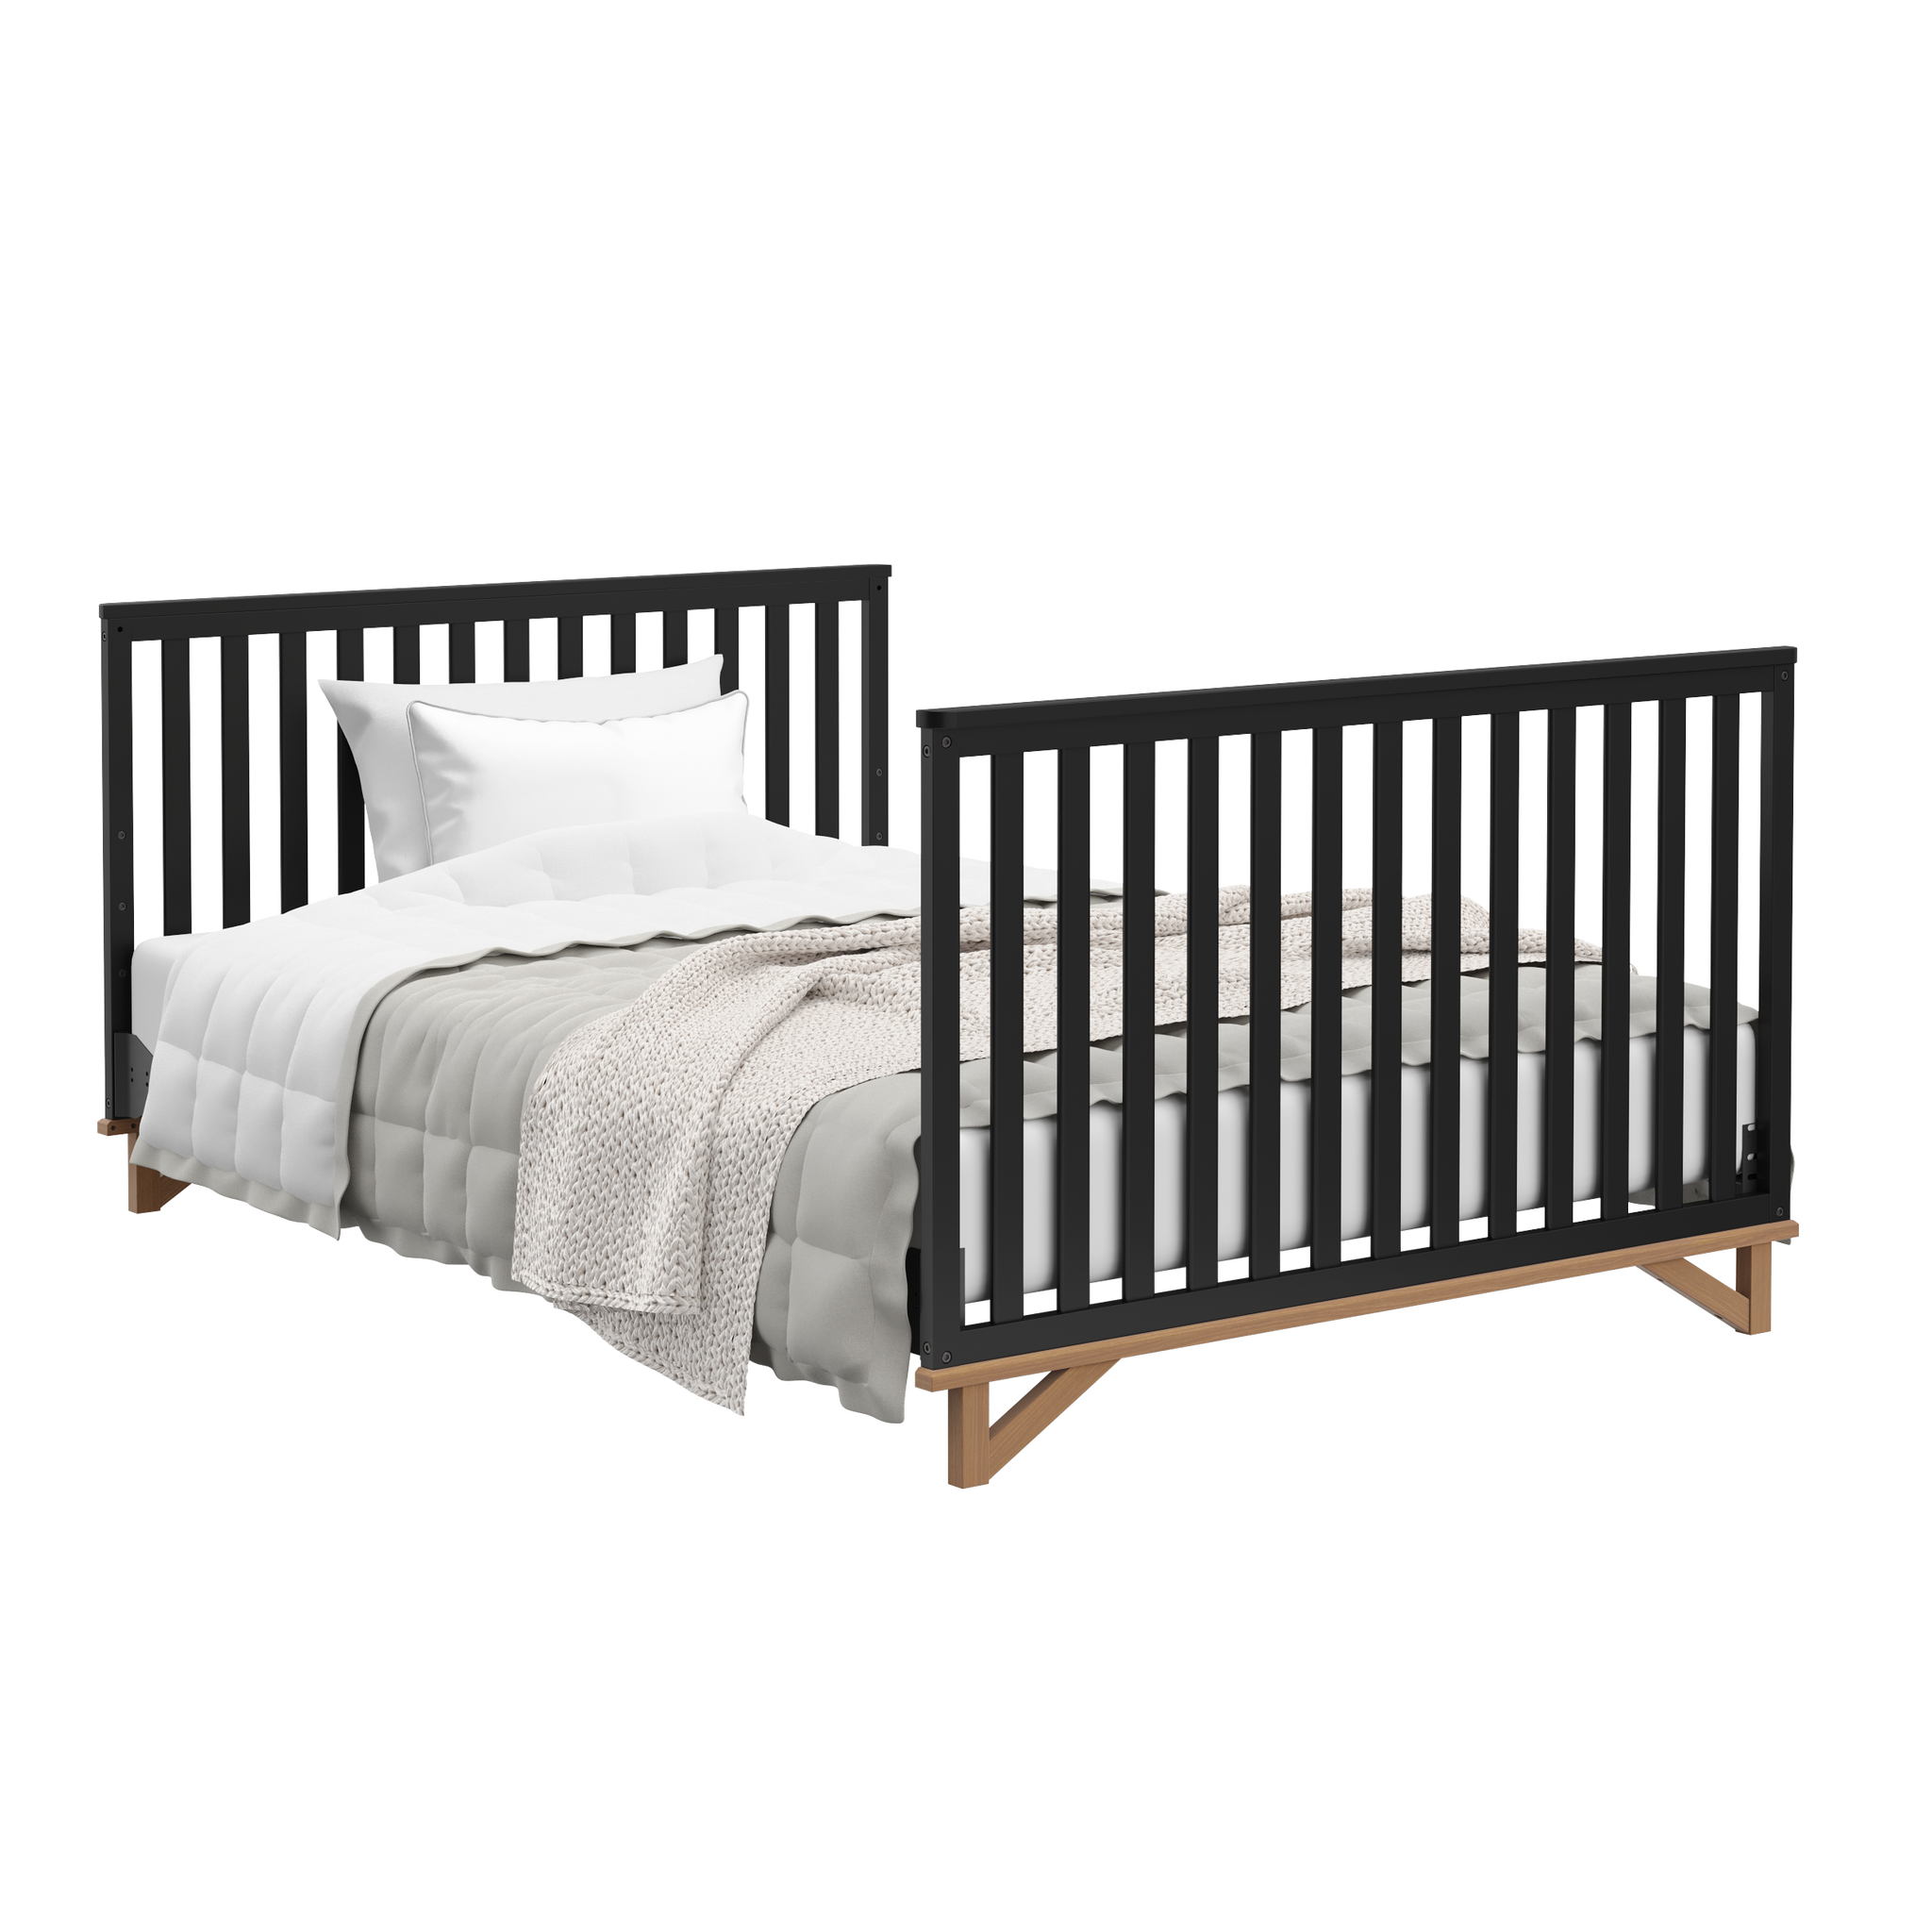 black with vintage driftwood crib in full-size bed conversion with both headboard and footboard